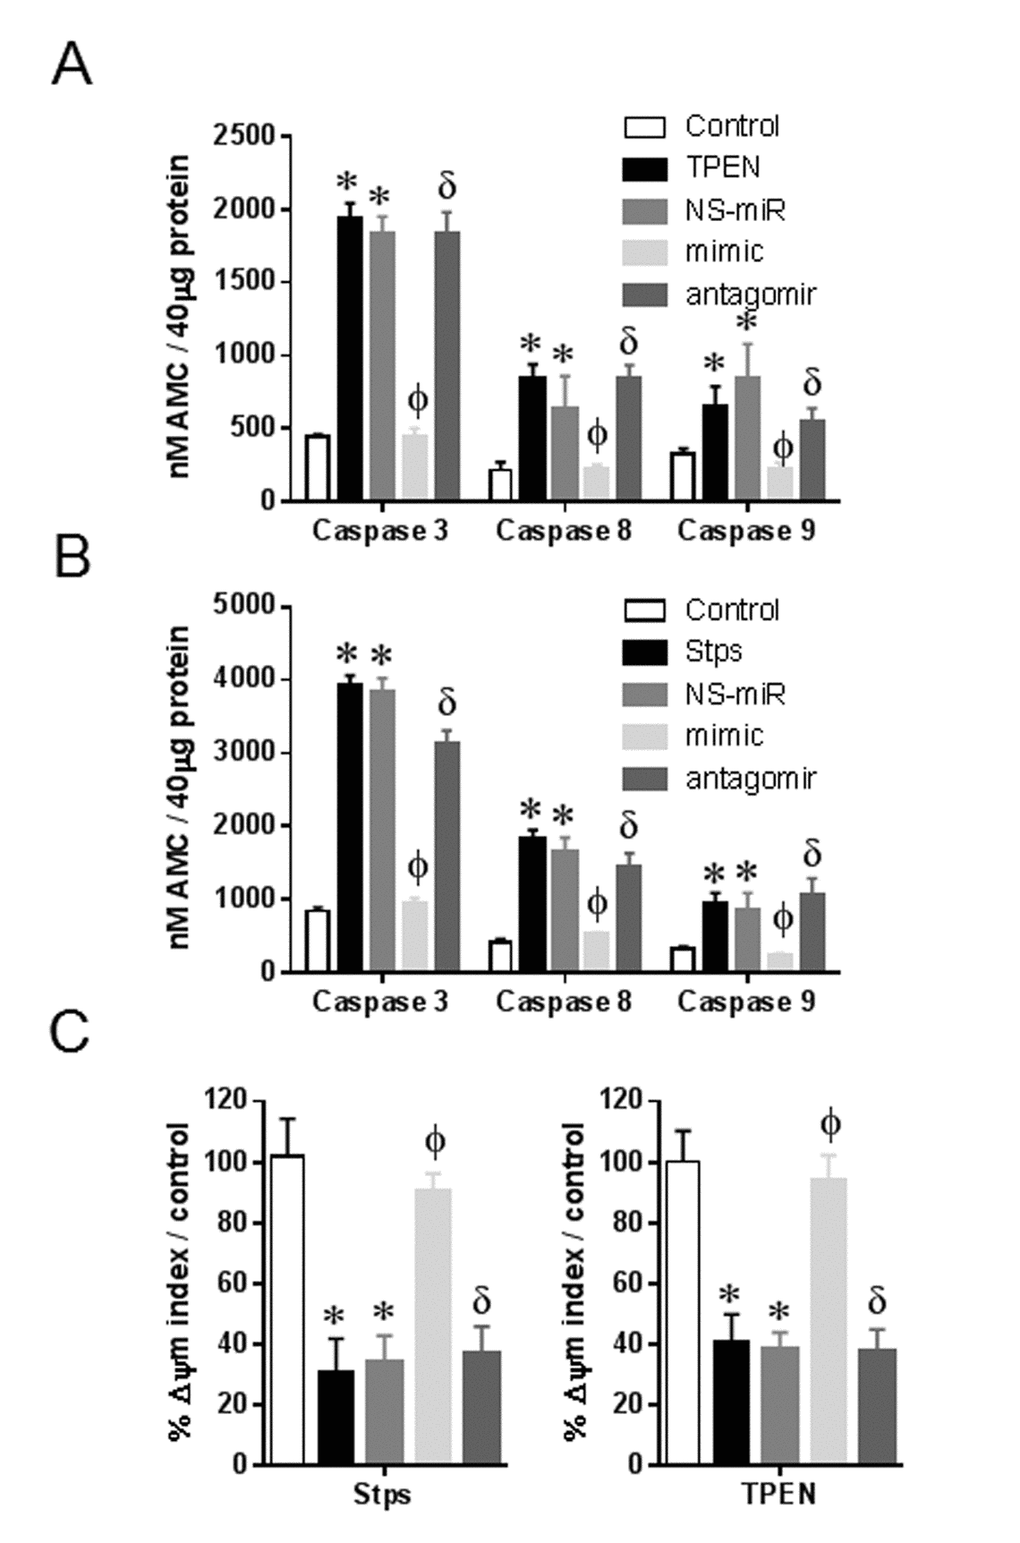 miR-434-3p protects myotubes from caspase activation and loss of mitochondrial membrane potential. Myotubes were transfected with NS-mimetic, miR-434-3p mimetic, miR-434-3p antagomir or no transfection for 24 h followed by eight hours TPEN (100 μM) or Stps (1 μM) incubation. (A and B) Enzymatic activities of caspase-3, -8 and -9 in myotubes treated with TPEN (A) and Stsp (B) were determined by caspase specific fluorogenic substrates. (C) Untreated (control) or treated myotubes were stained with JC-1 and observed under TRITC (590 nm) and GFP (530 nm) filters. % Δψm index represents the ratio of red to green fluorescence. Each bar indicates mean ± SEM (n = 3). *, p 